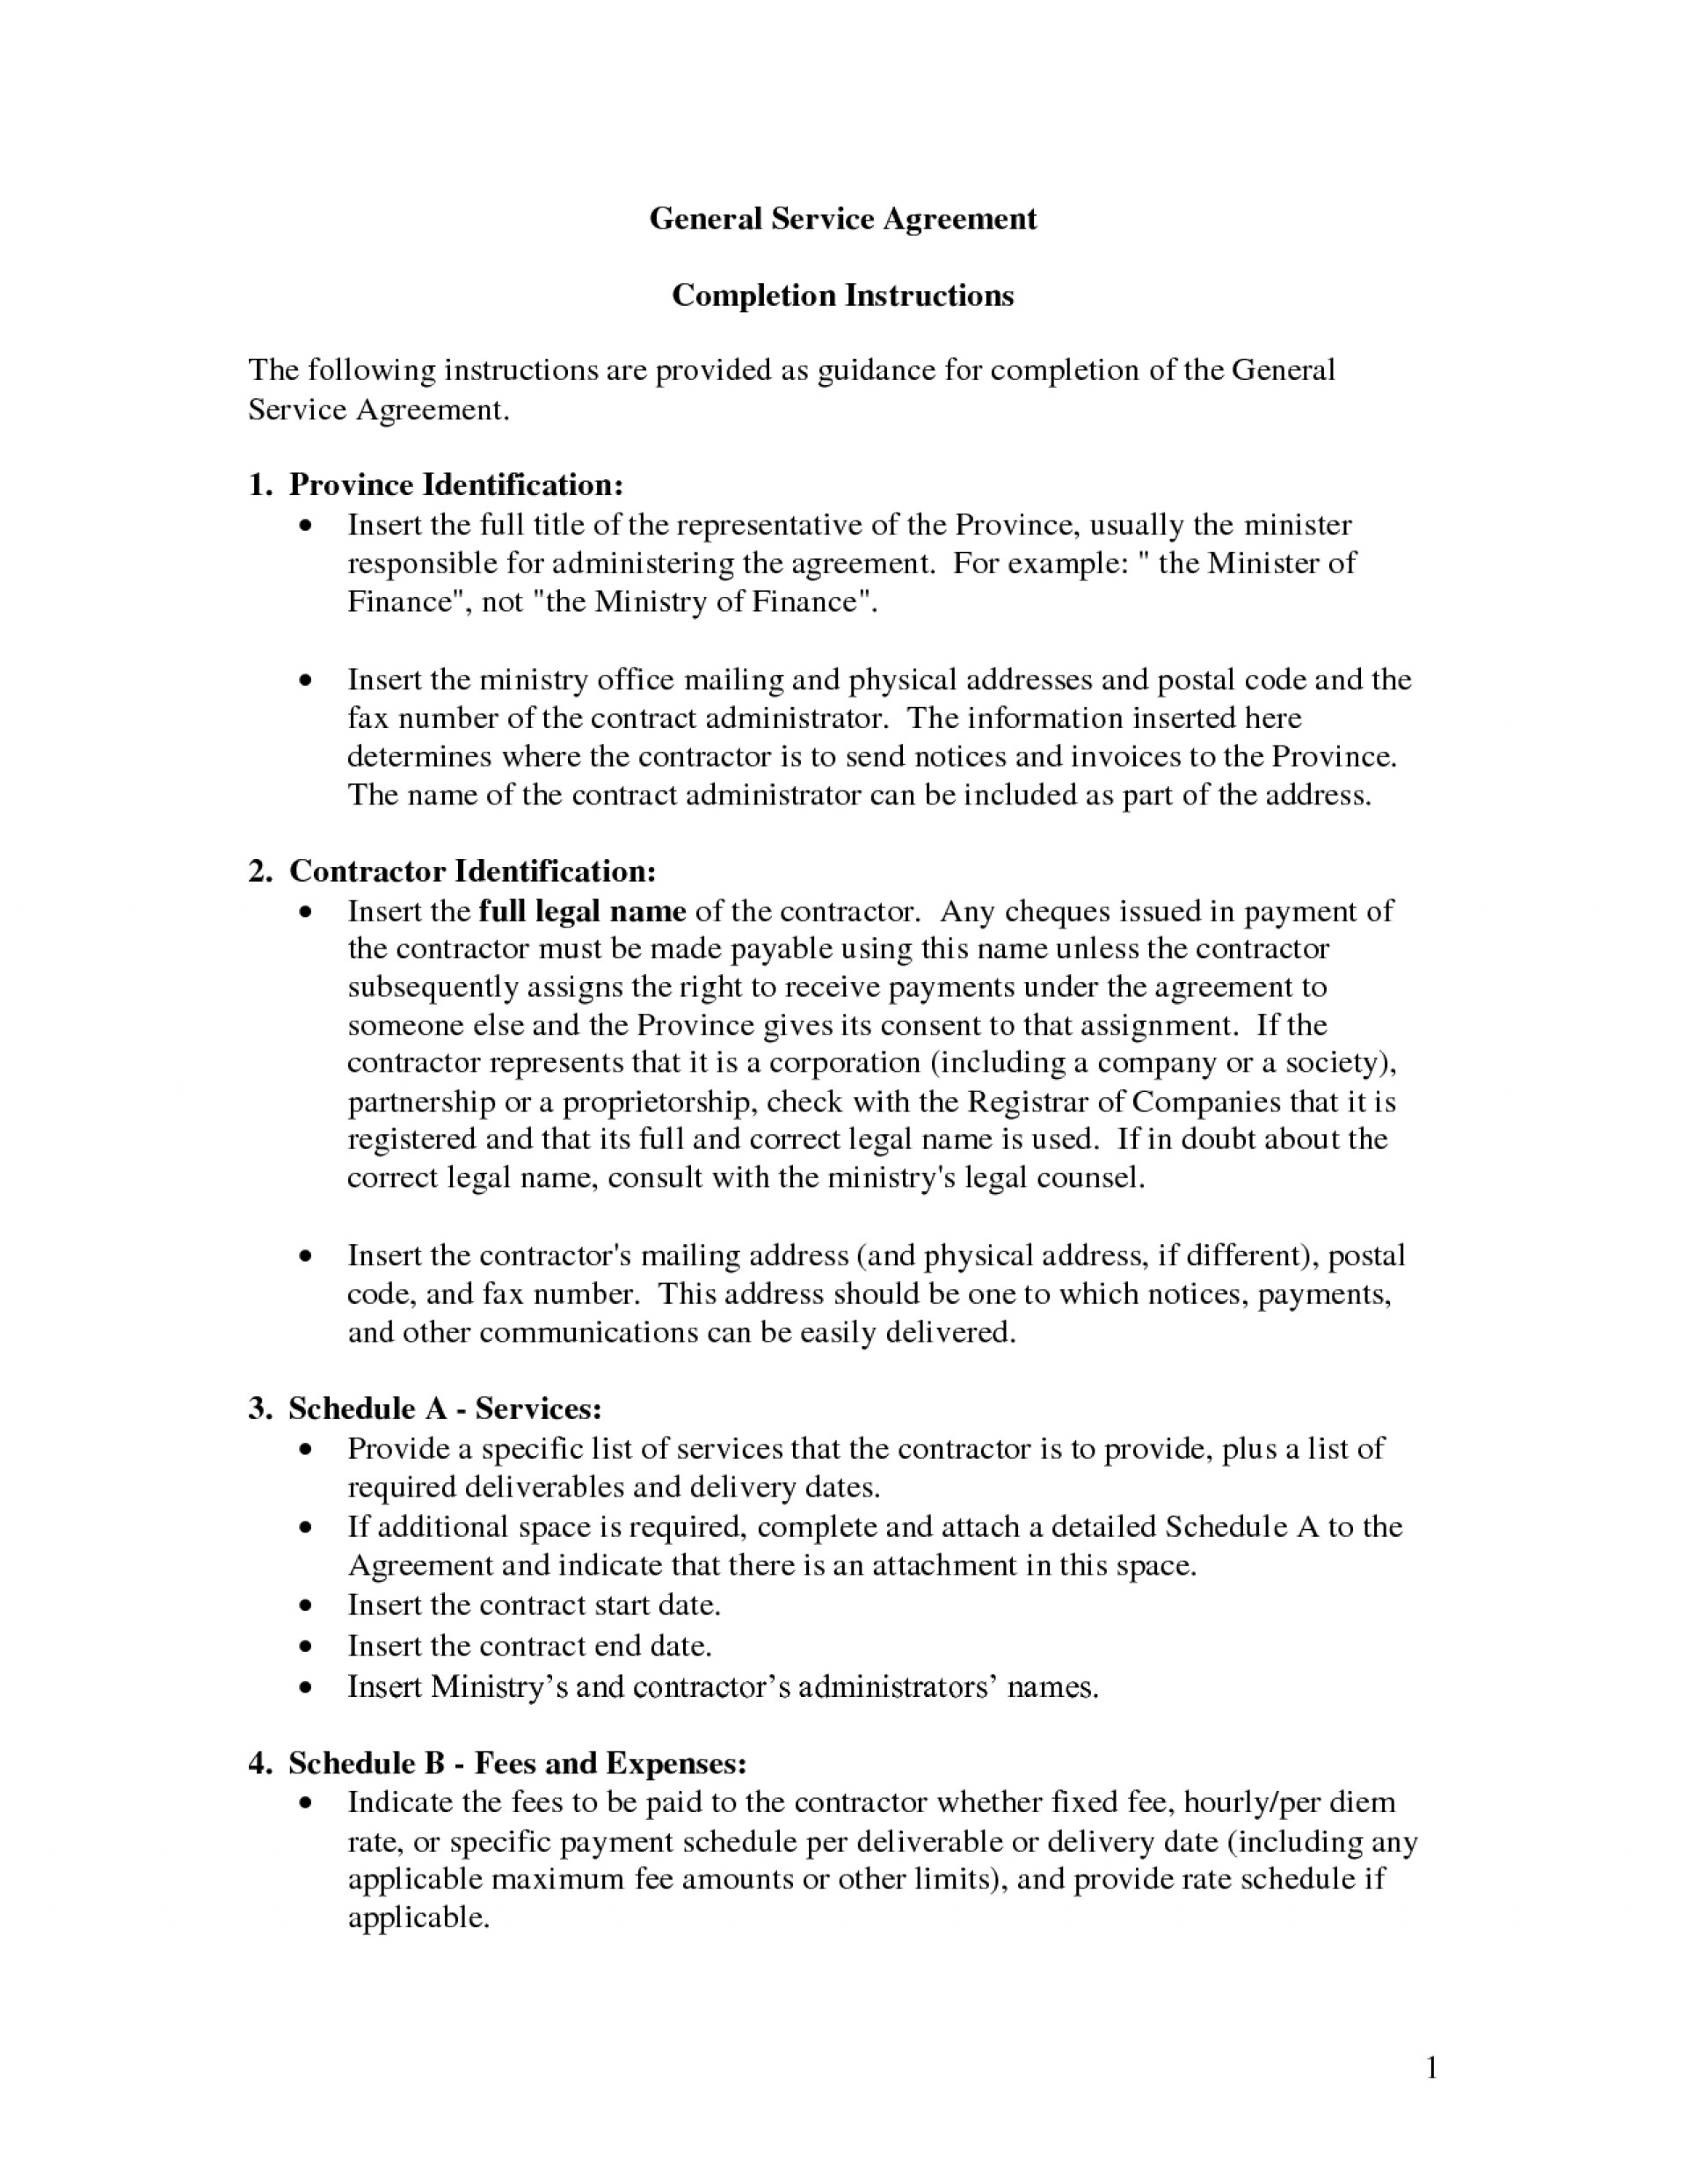 Professional Services Agreement 008 Template Ideas Professional Services Agreement General Service